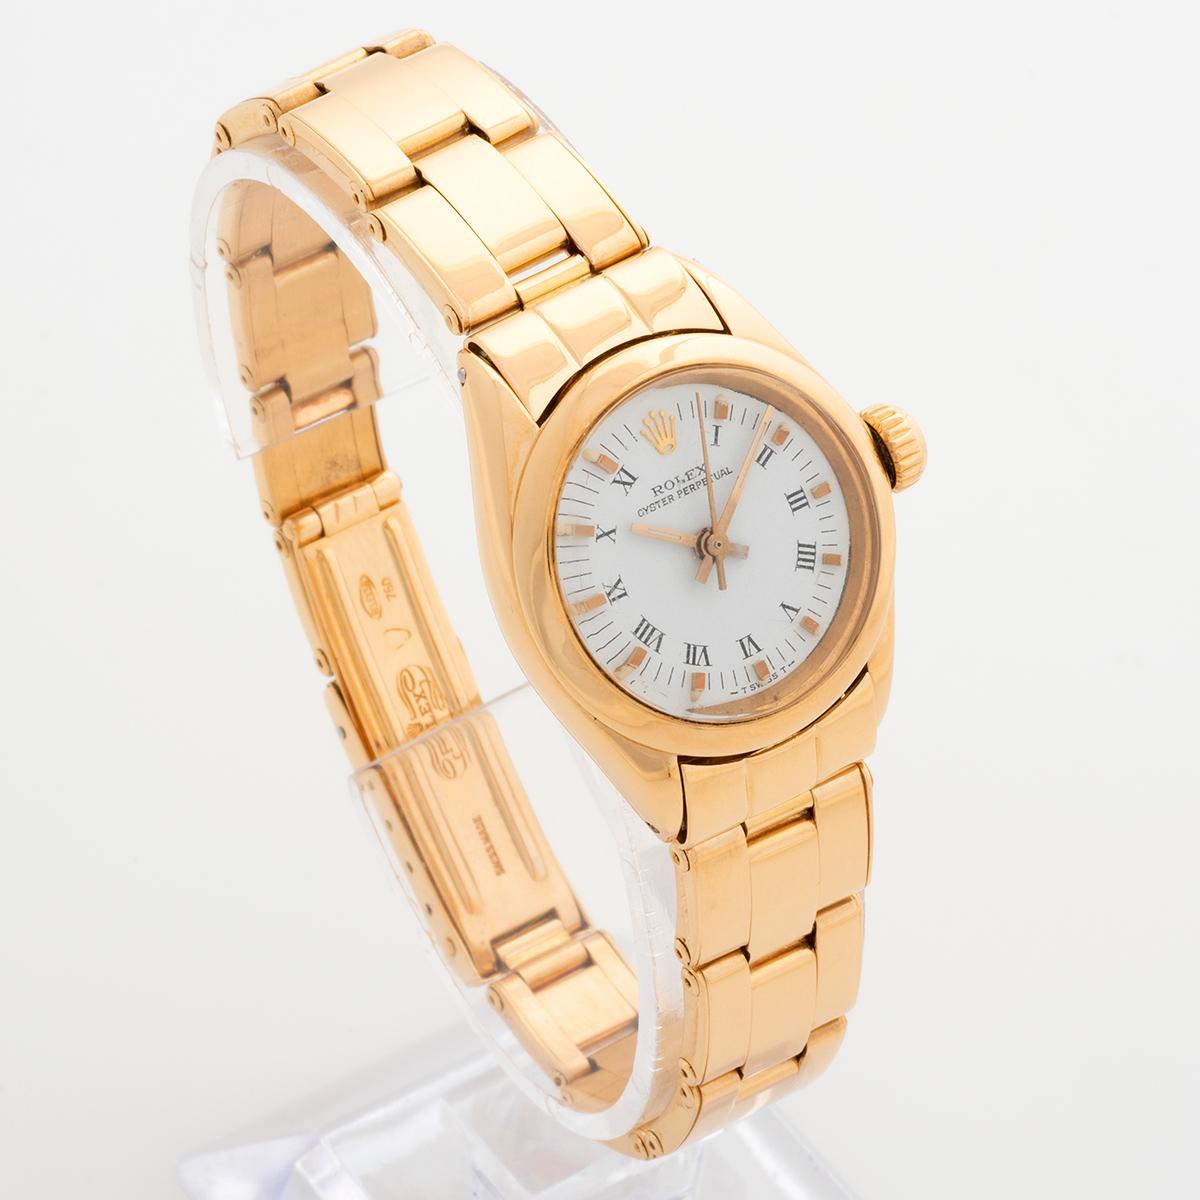 Our vintage and rare Rolex Lady Oyster Perpetual reference 6718 features an 18k yellow gold case and 18k riveted Oyster bracelet, with white Roman numeral dial. Presented in excellent condition, certainly given the age, our ladies Rolex Oyster has